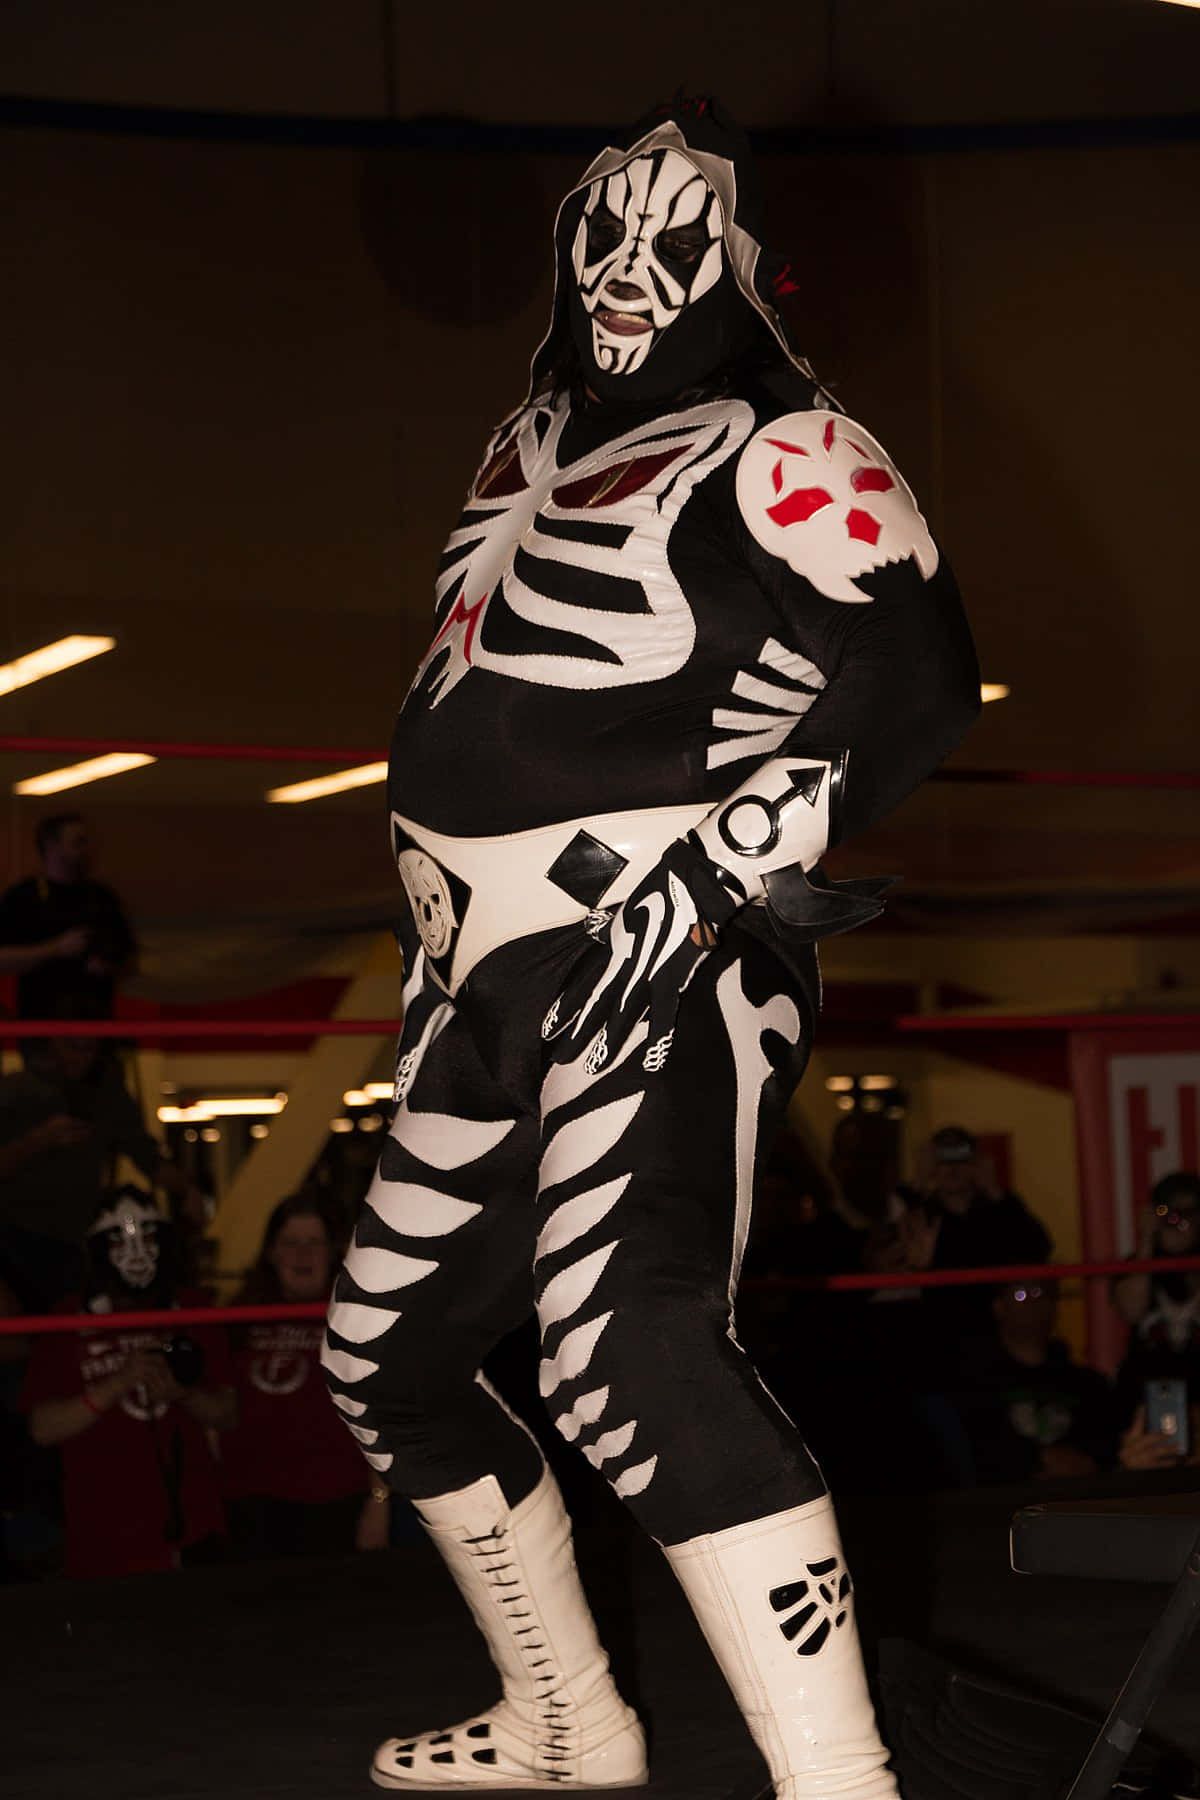 La Parka, The Legendary Mexican Luchador in His Iconic Mask Wallpaper